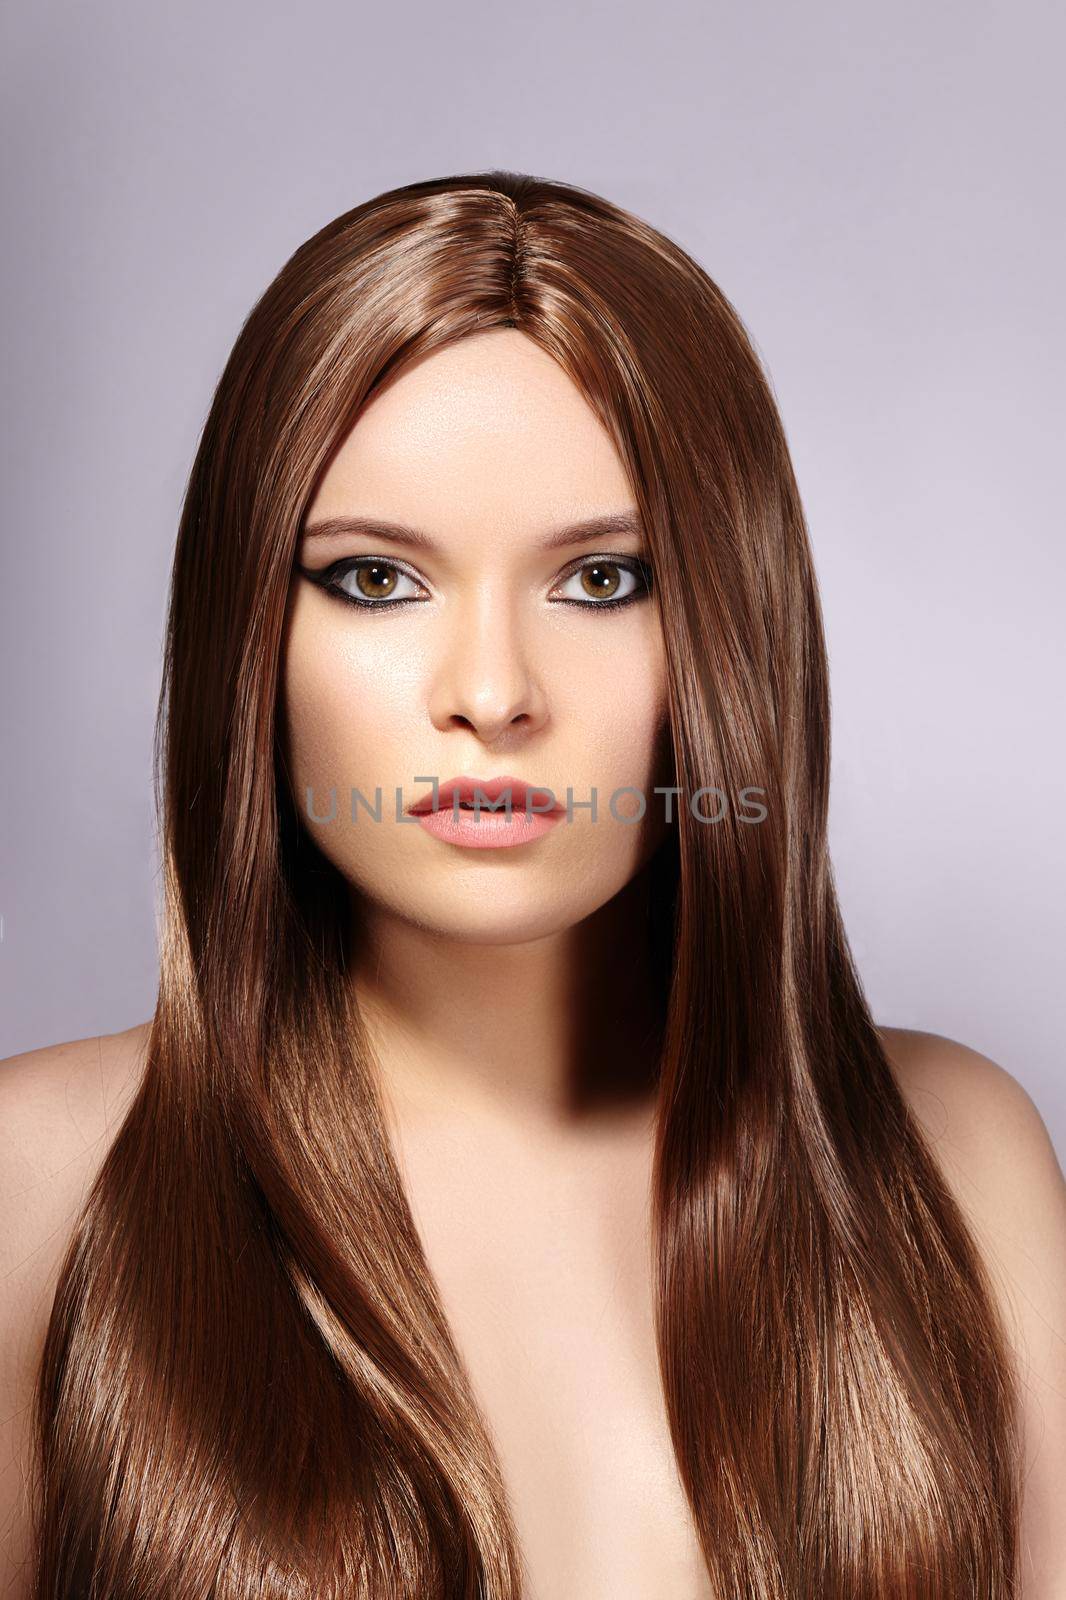 Beautiful yong Woman with Long Straight Brown Hair. Sexy Fashion Model with Smooth Gloss Hairstyle. Keratine Treatment. Vertical studio shot